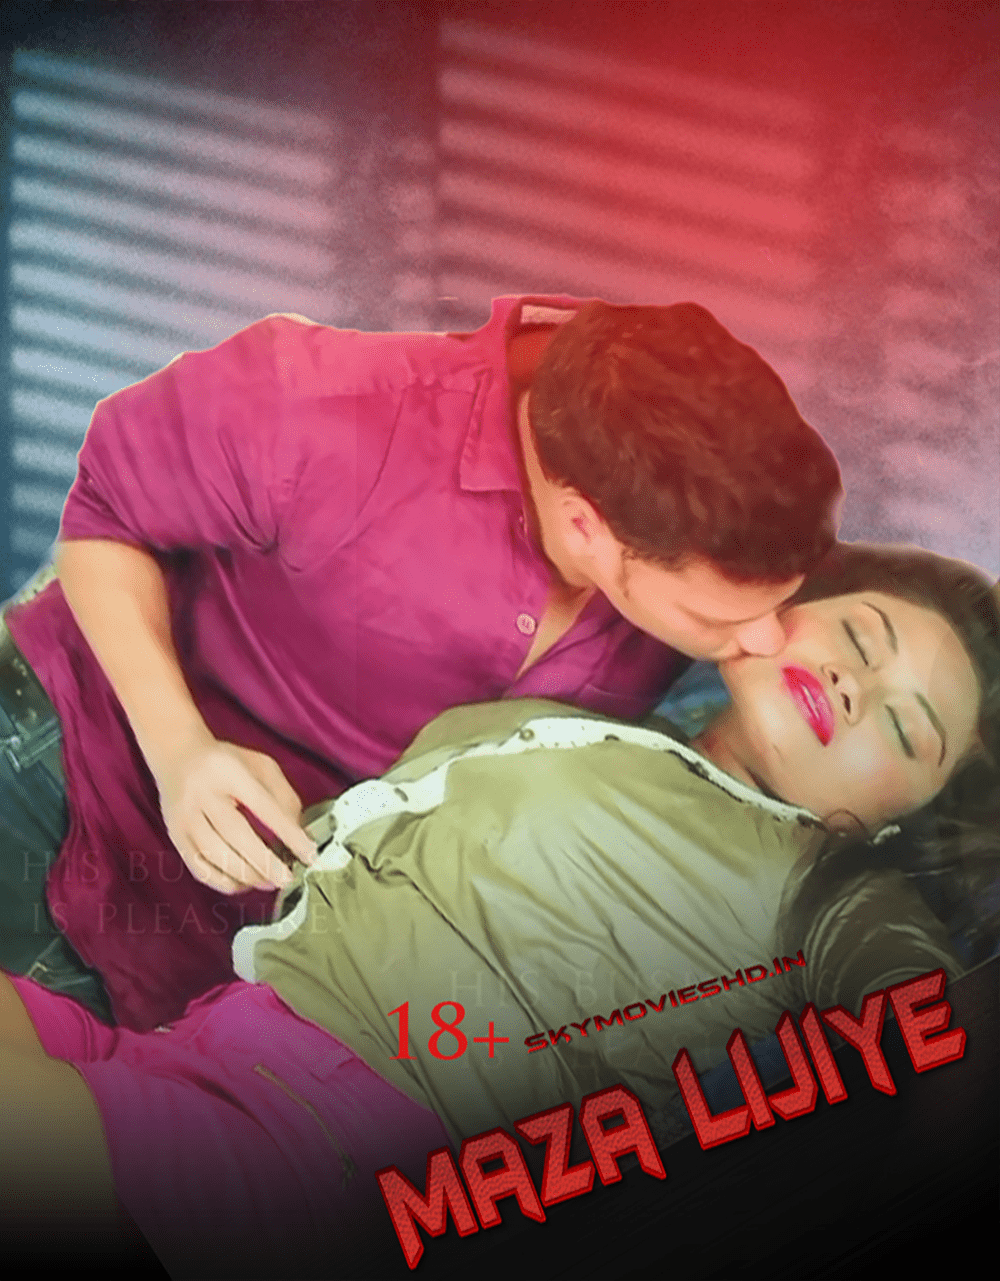 You are currently viewing Maza Lijiye 2021 Hindi Hot Short Film 720p HDRip 130MB Download & Watch Online